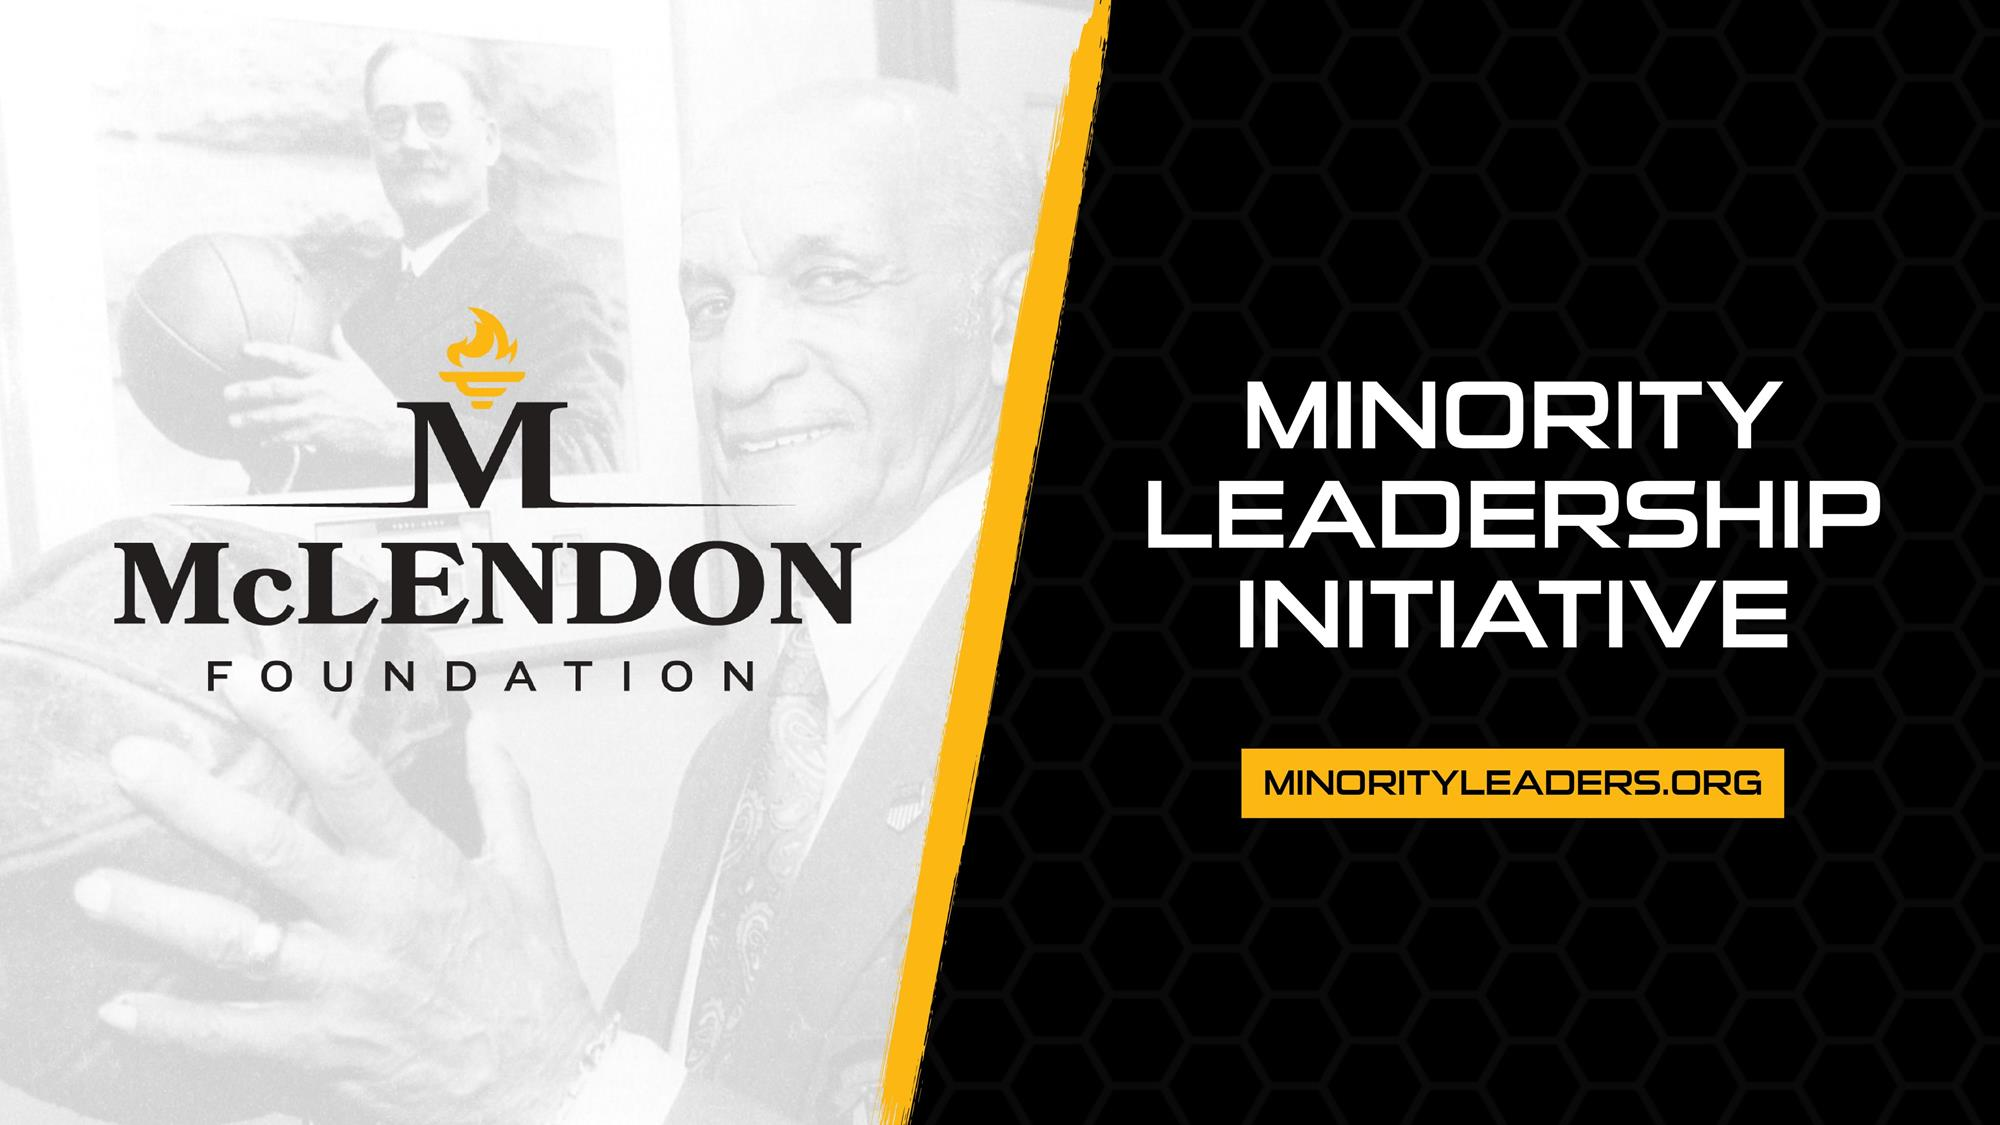 Coach Calipari Partners with the McLendon Foundation to Help Launch McLendon Minority Leadership Initiative